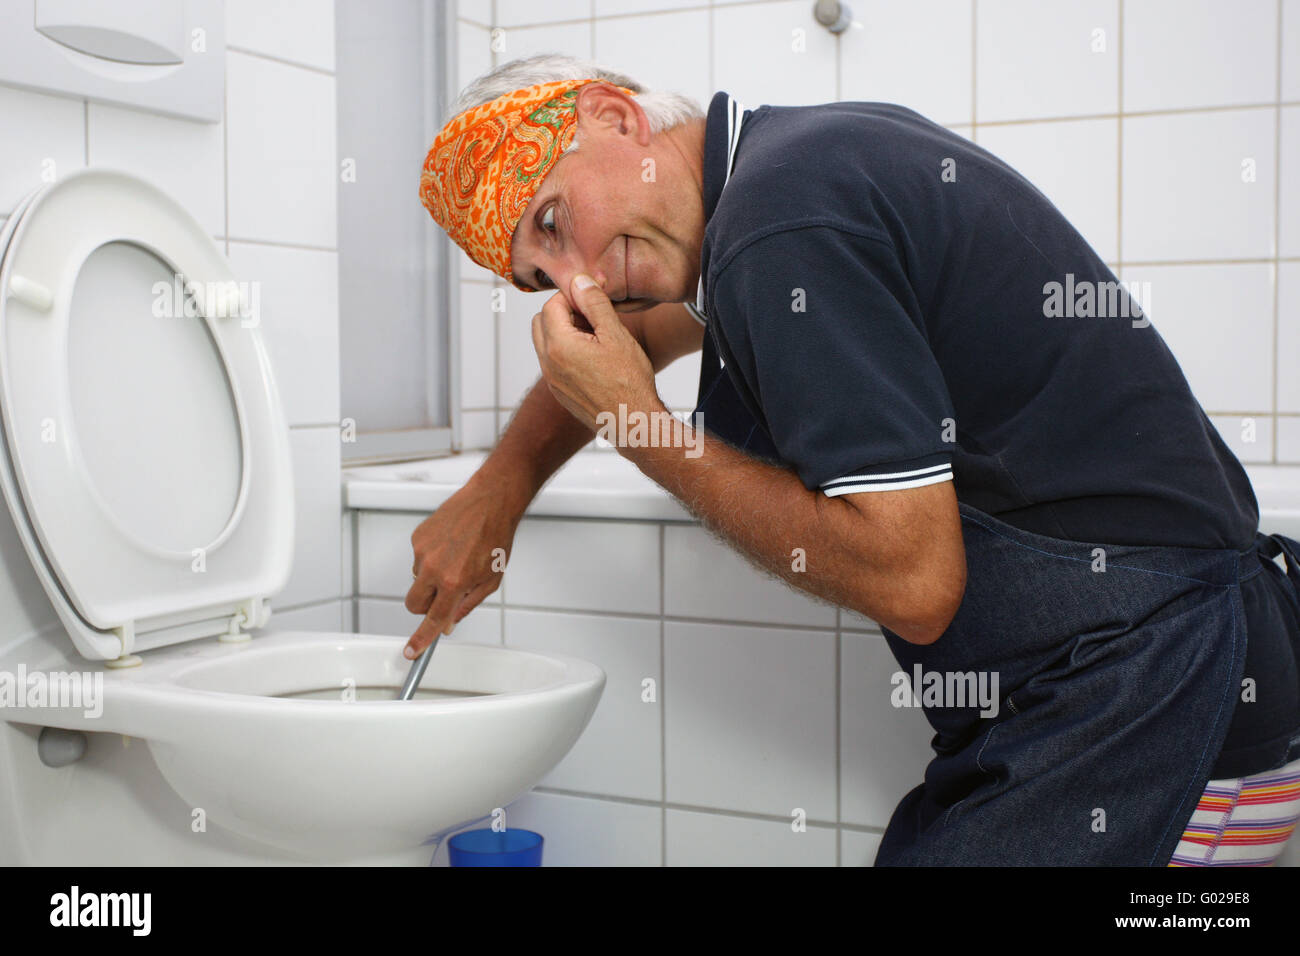 Stinken High Resolution Stock Photography and Images - Alamy